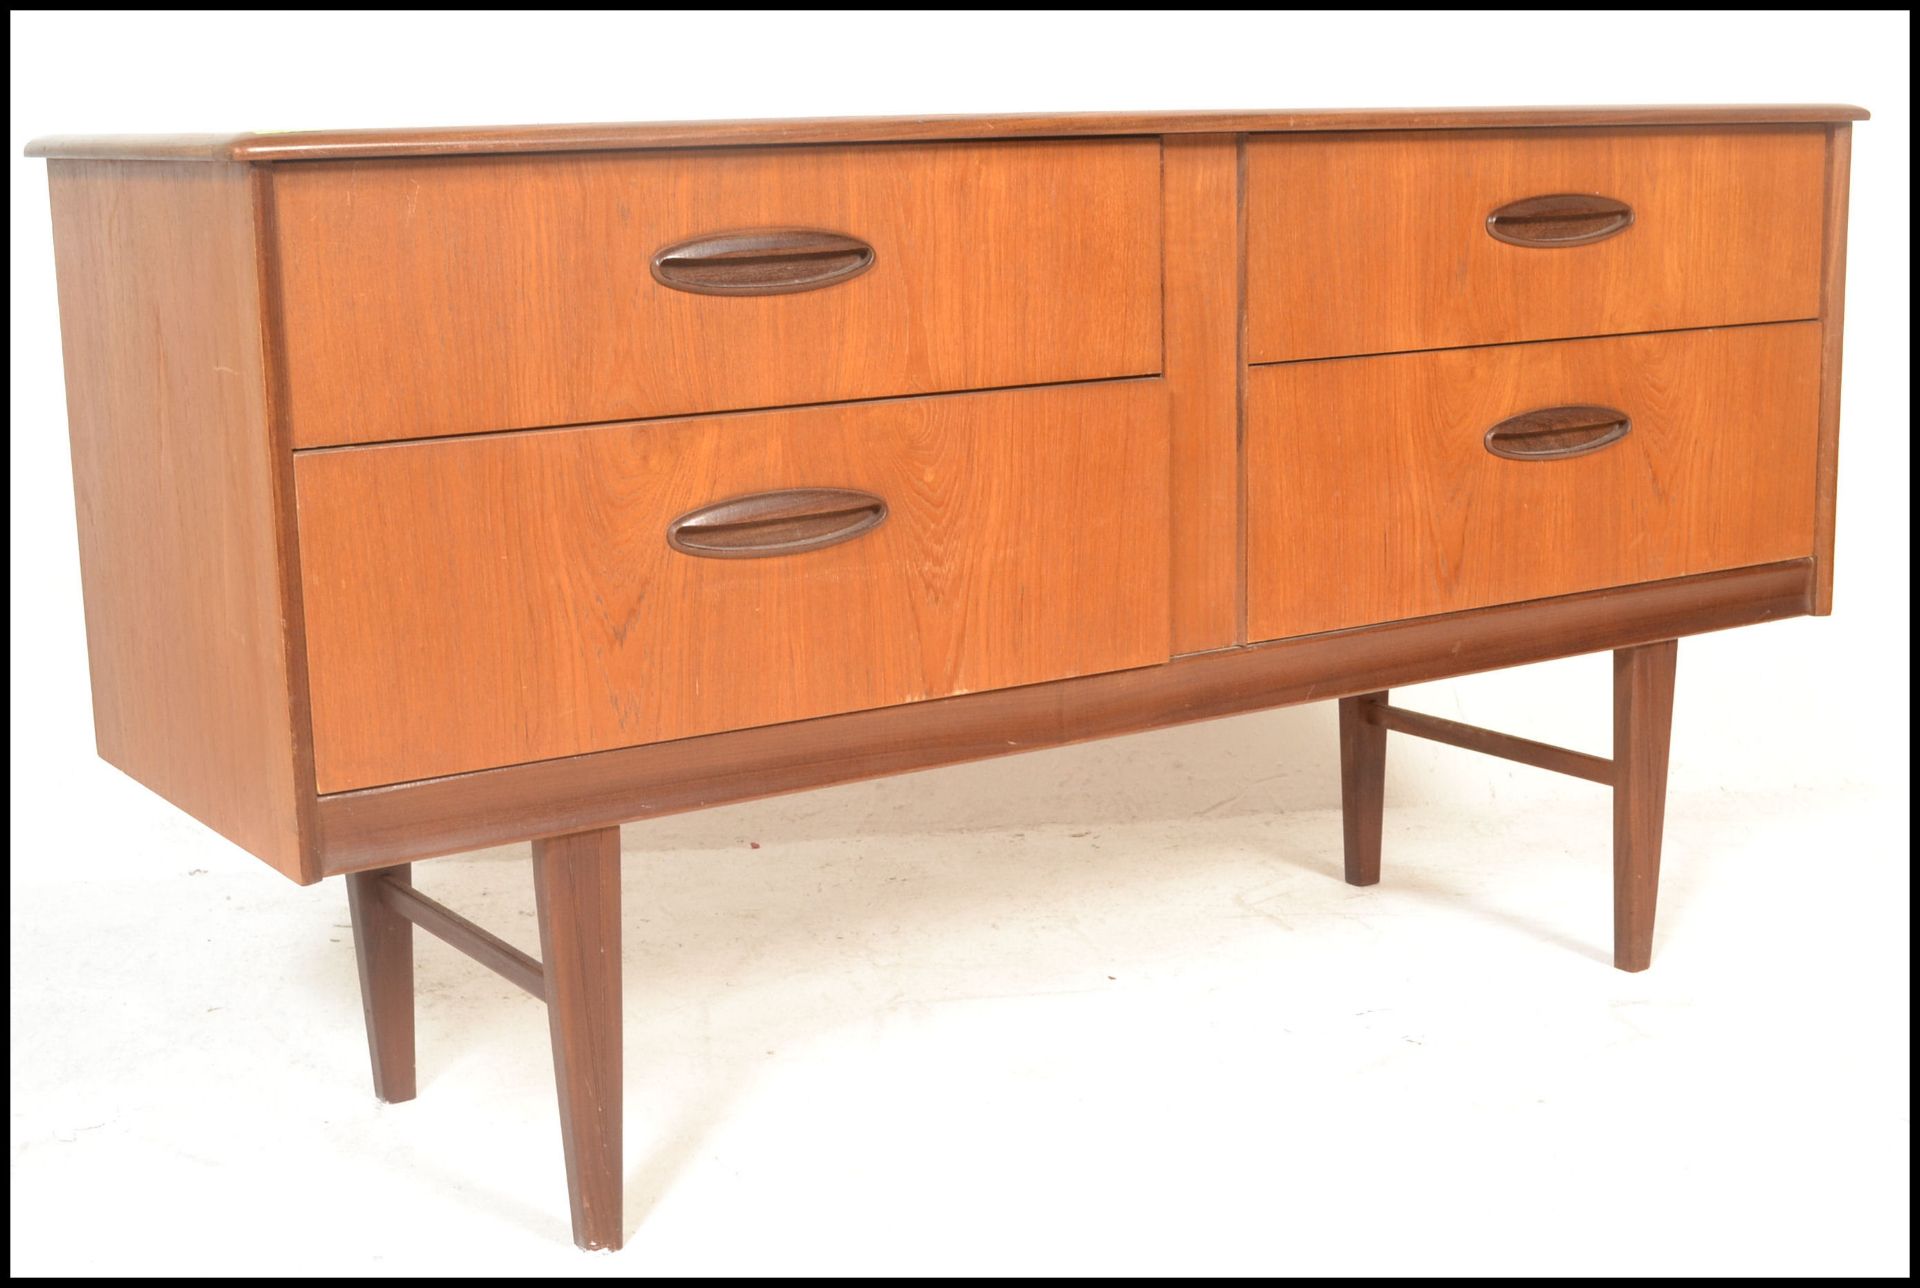 A retro 20th Century teak wood Danish inspired sideboard / credenza, having a twin bank of drawers